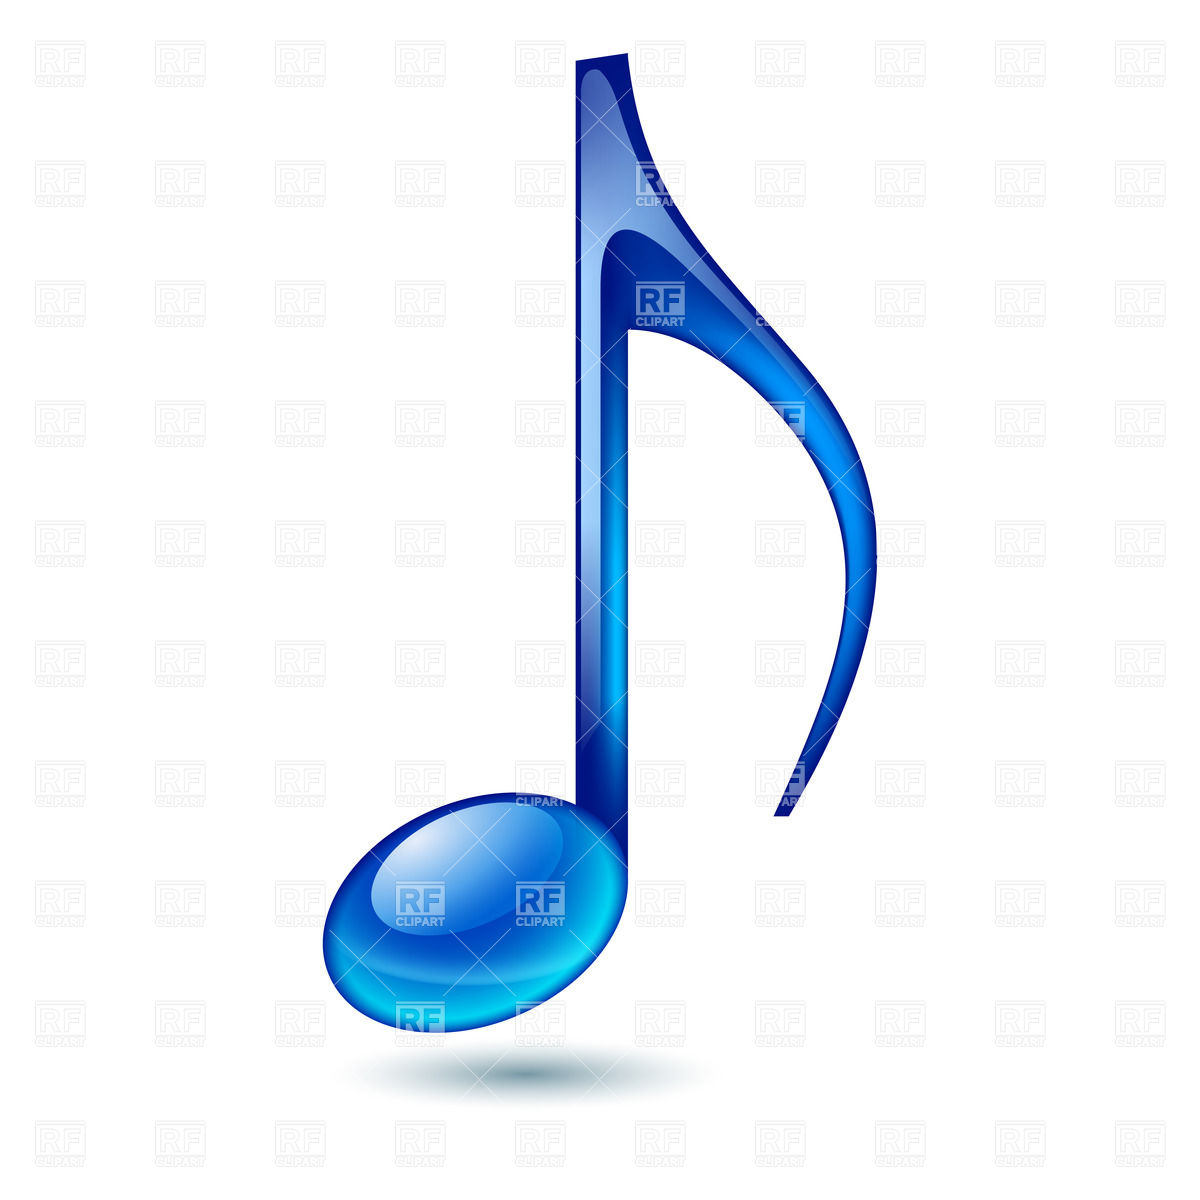 Musical Notes Background Blue   Clipart Panda   Free Clipart Images